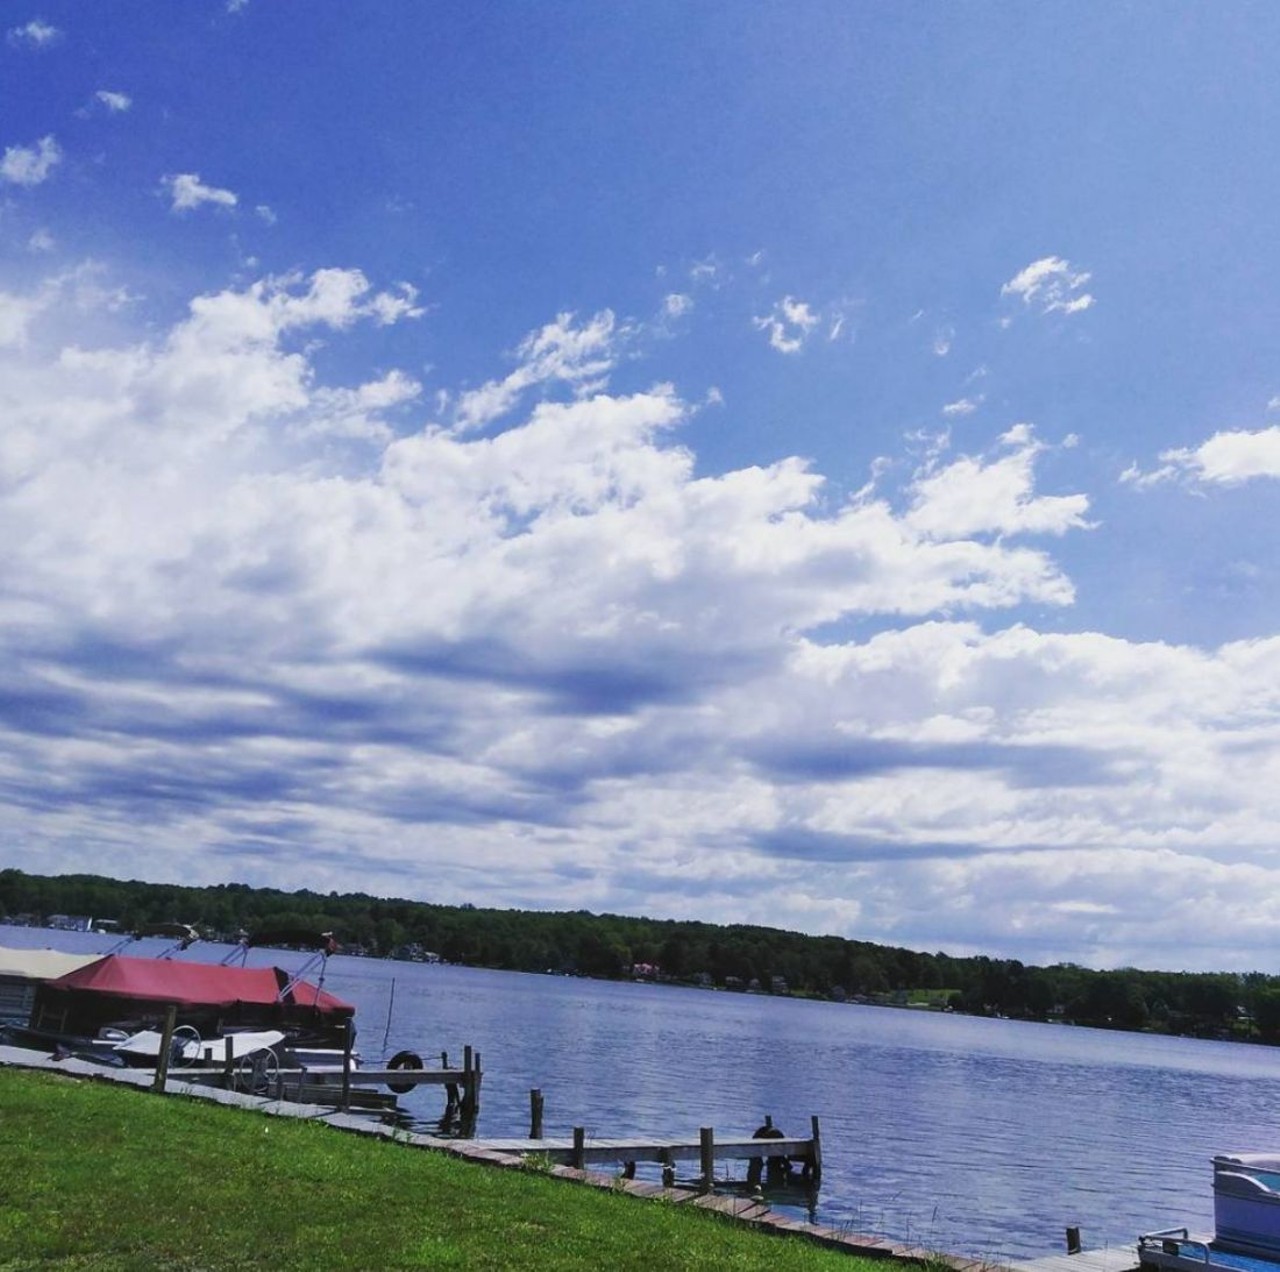 Conneaut Township Park
480 Lake Rd., Conneaut, 440-599-7071
Conneaut Township Park is a small, .4-mile long beach with a nice view of Lake Erie and several spots to picnic and enjoy. 
Photo via edensweden/Instagram